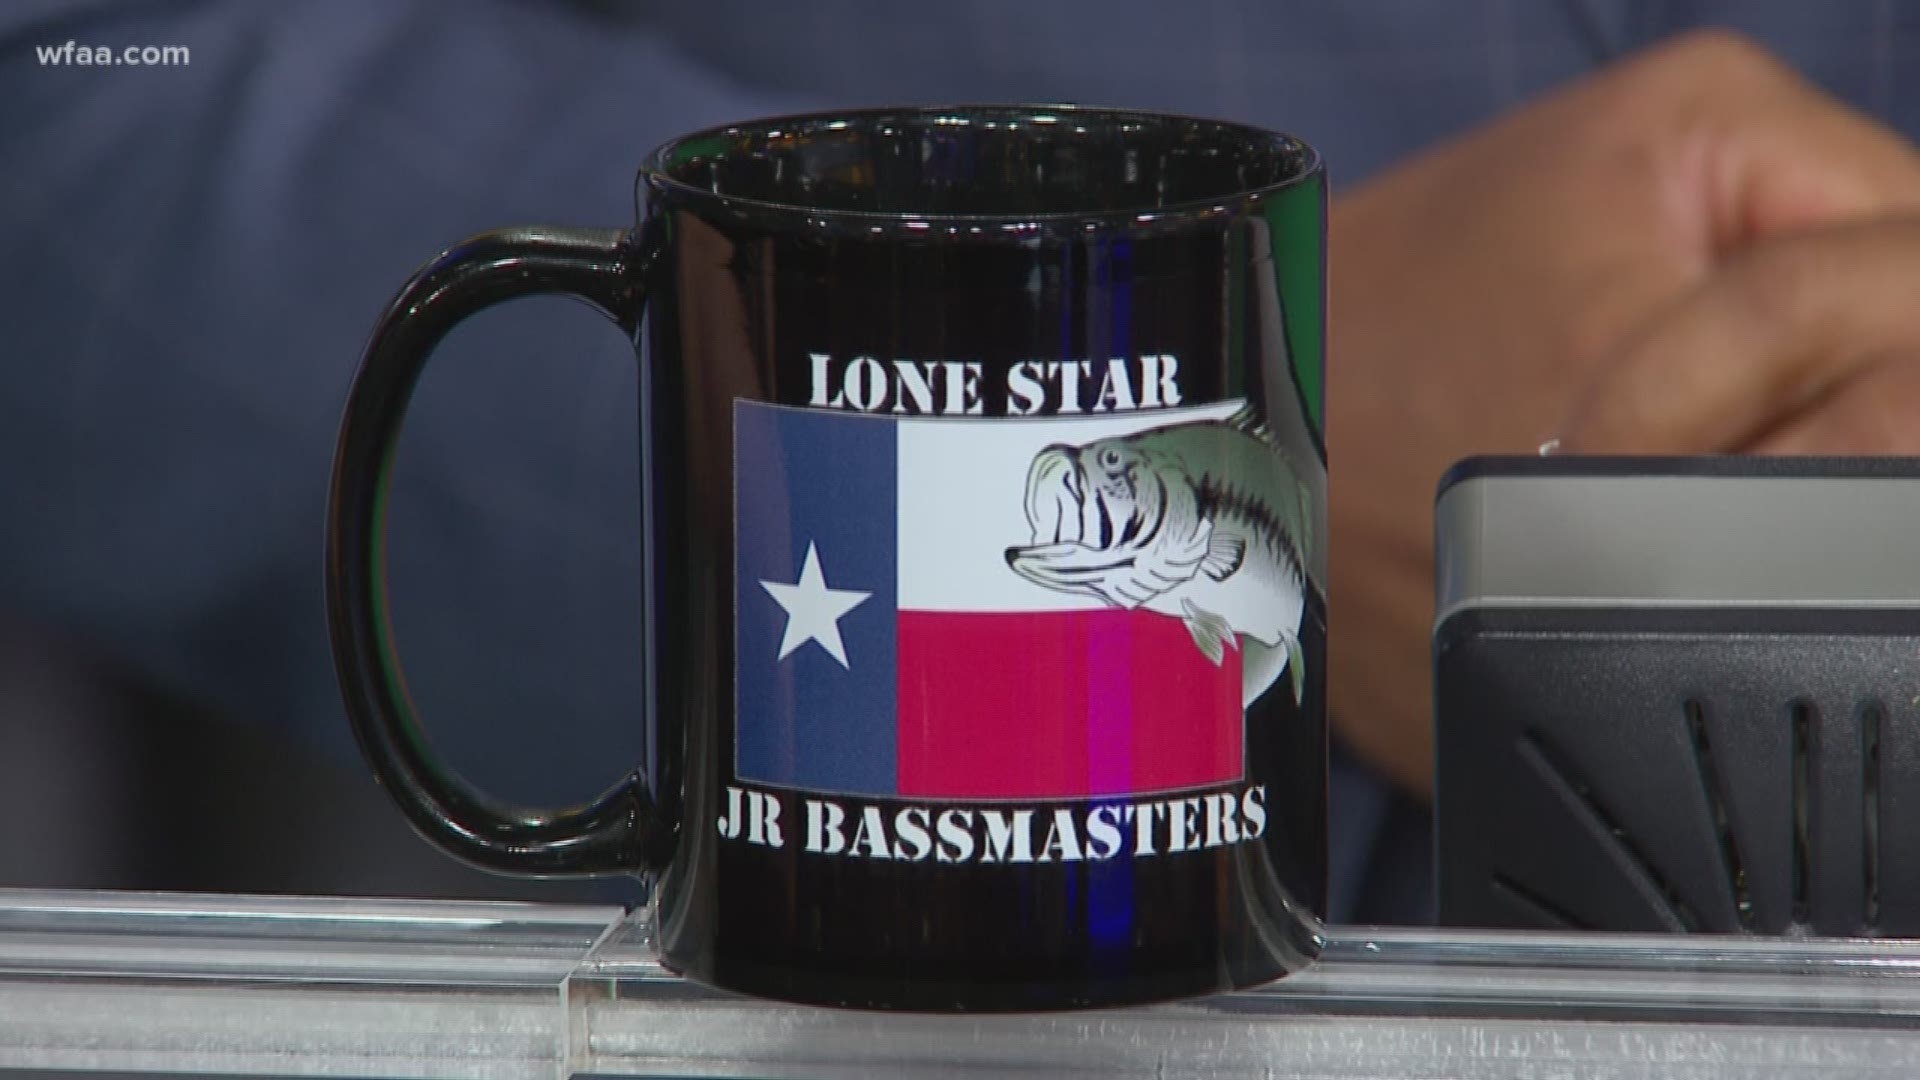 What's up with Greg's cup? Lone Star Junior Bassmasters